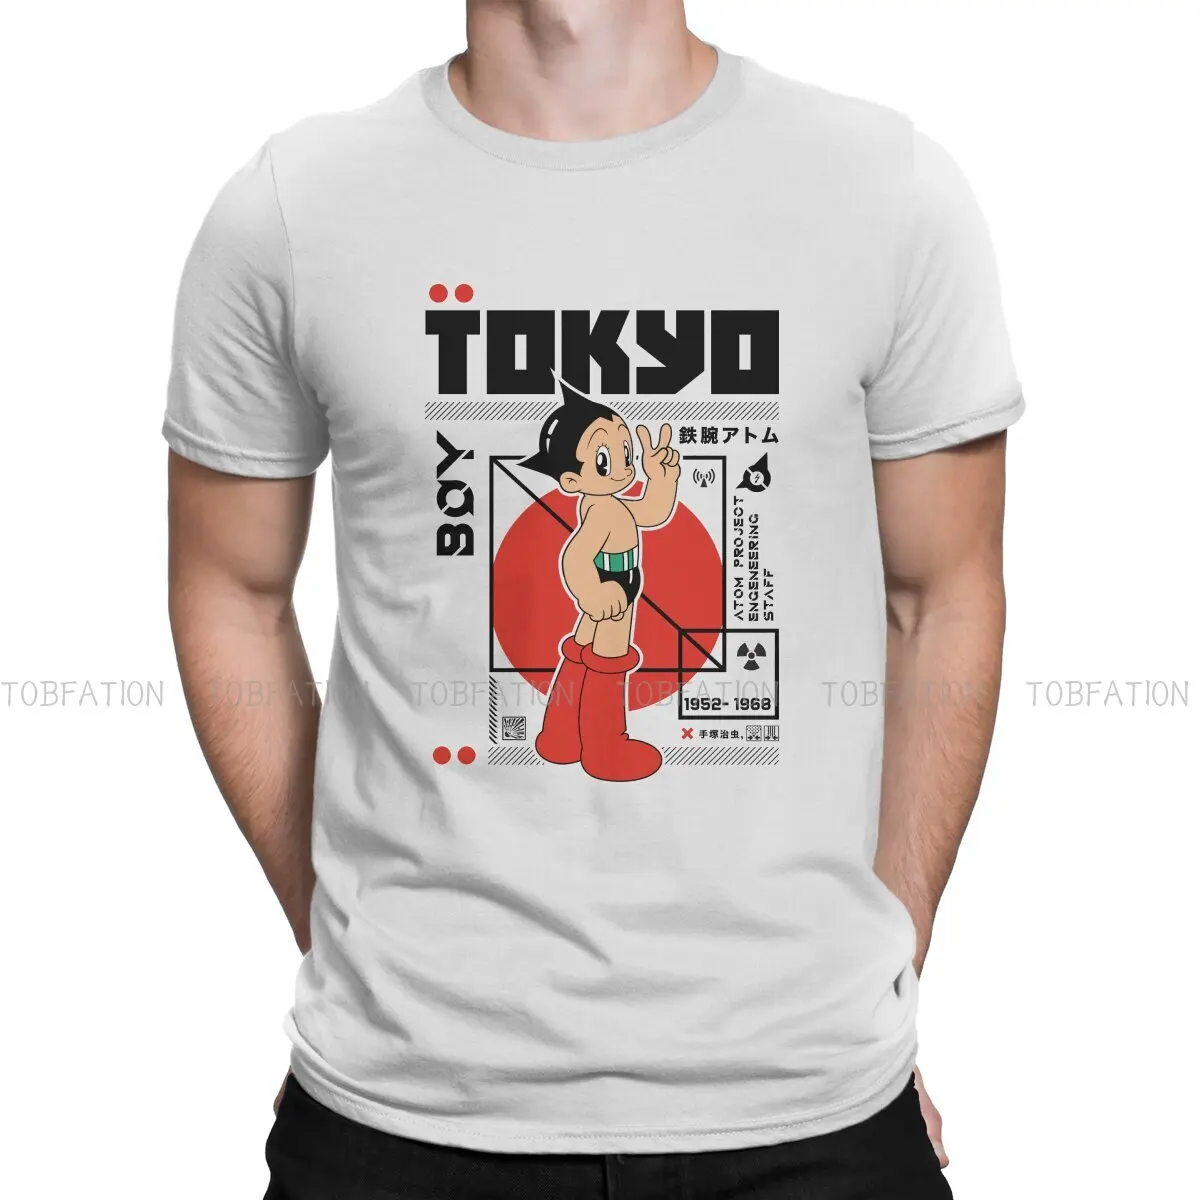 Tokyo Classic  Hipster TShirts Astro Boy Manga Male Graphic Pure Cotton Tops T Shirt O Neck Big Size